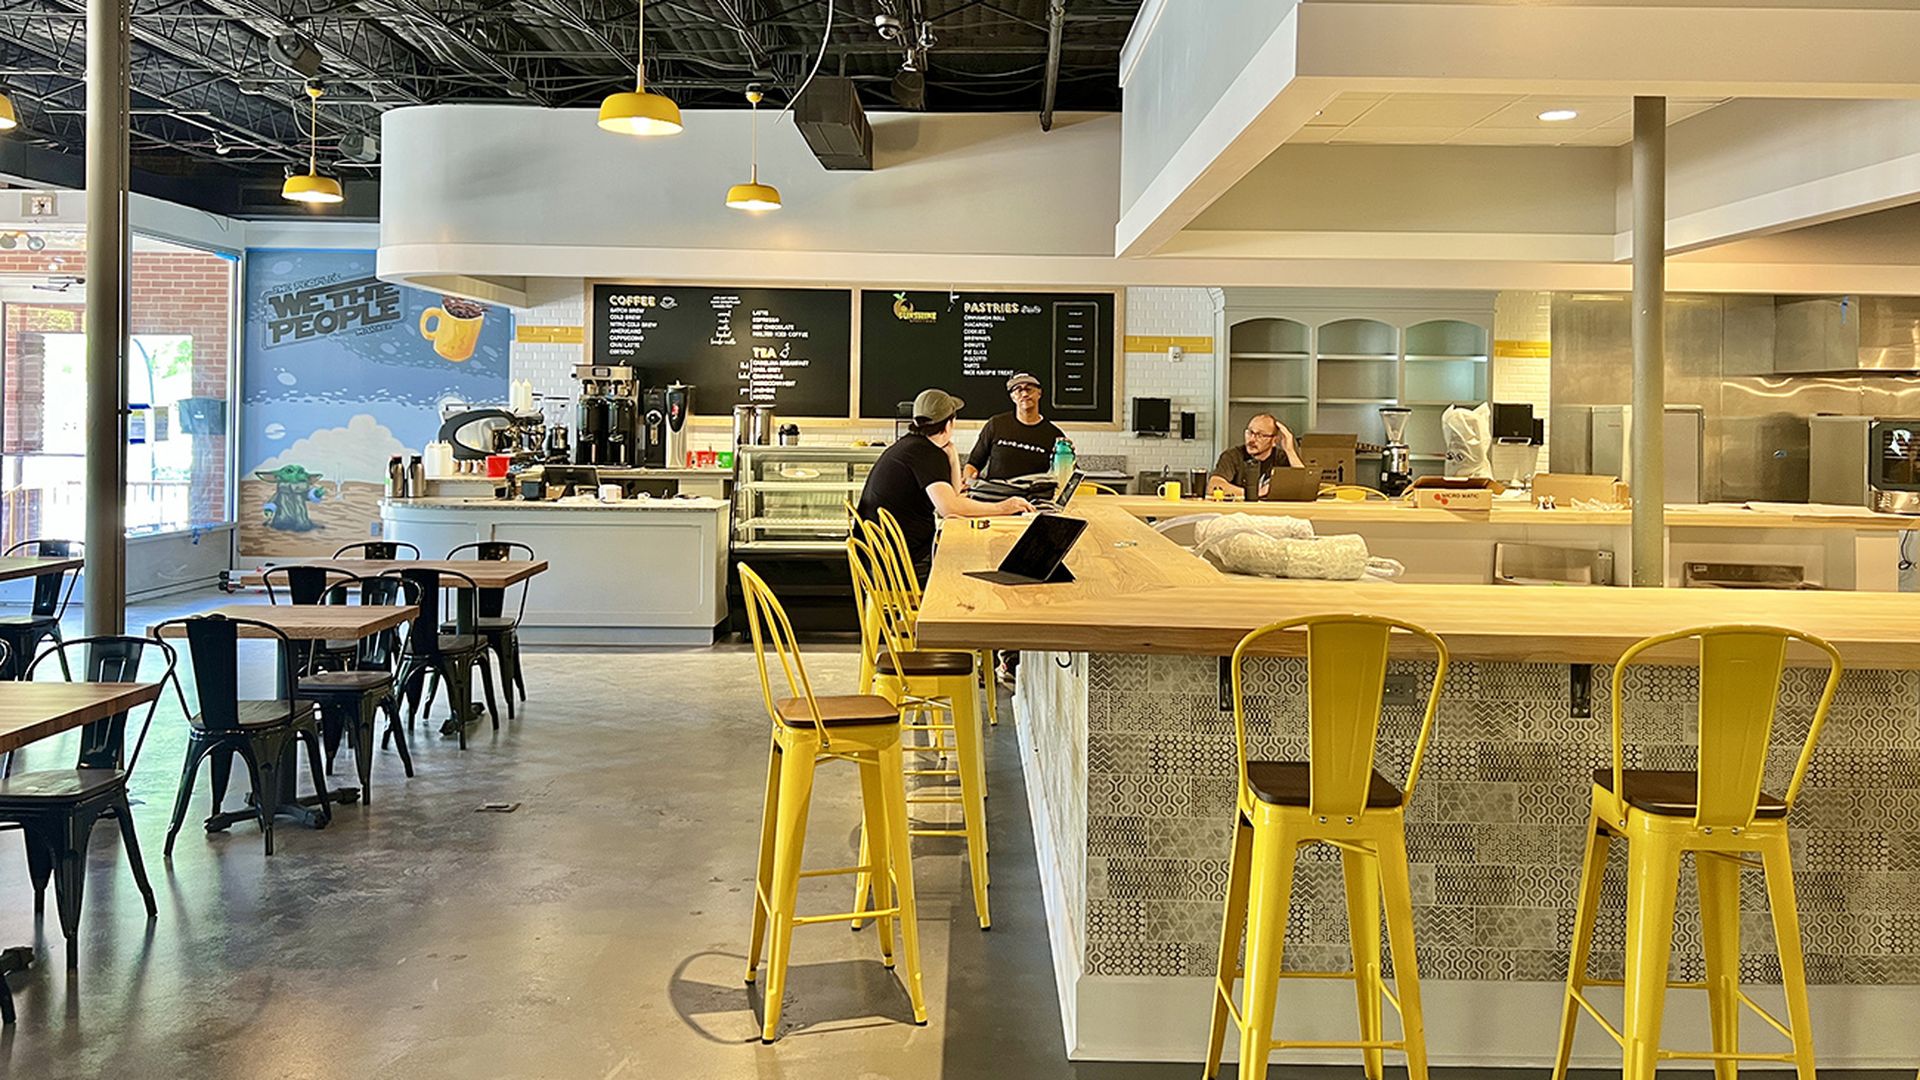 Inside a coffee shop, therer are yellow stools lined up around the counter space and a mural in the back that reads "we the people."